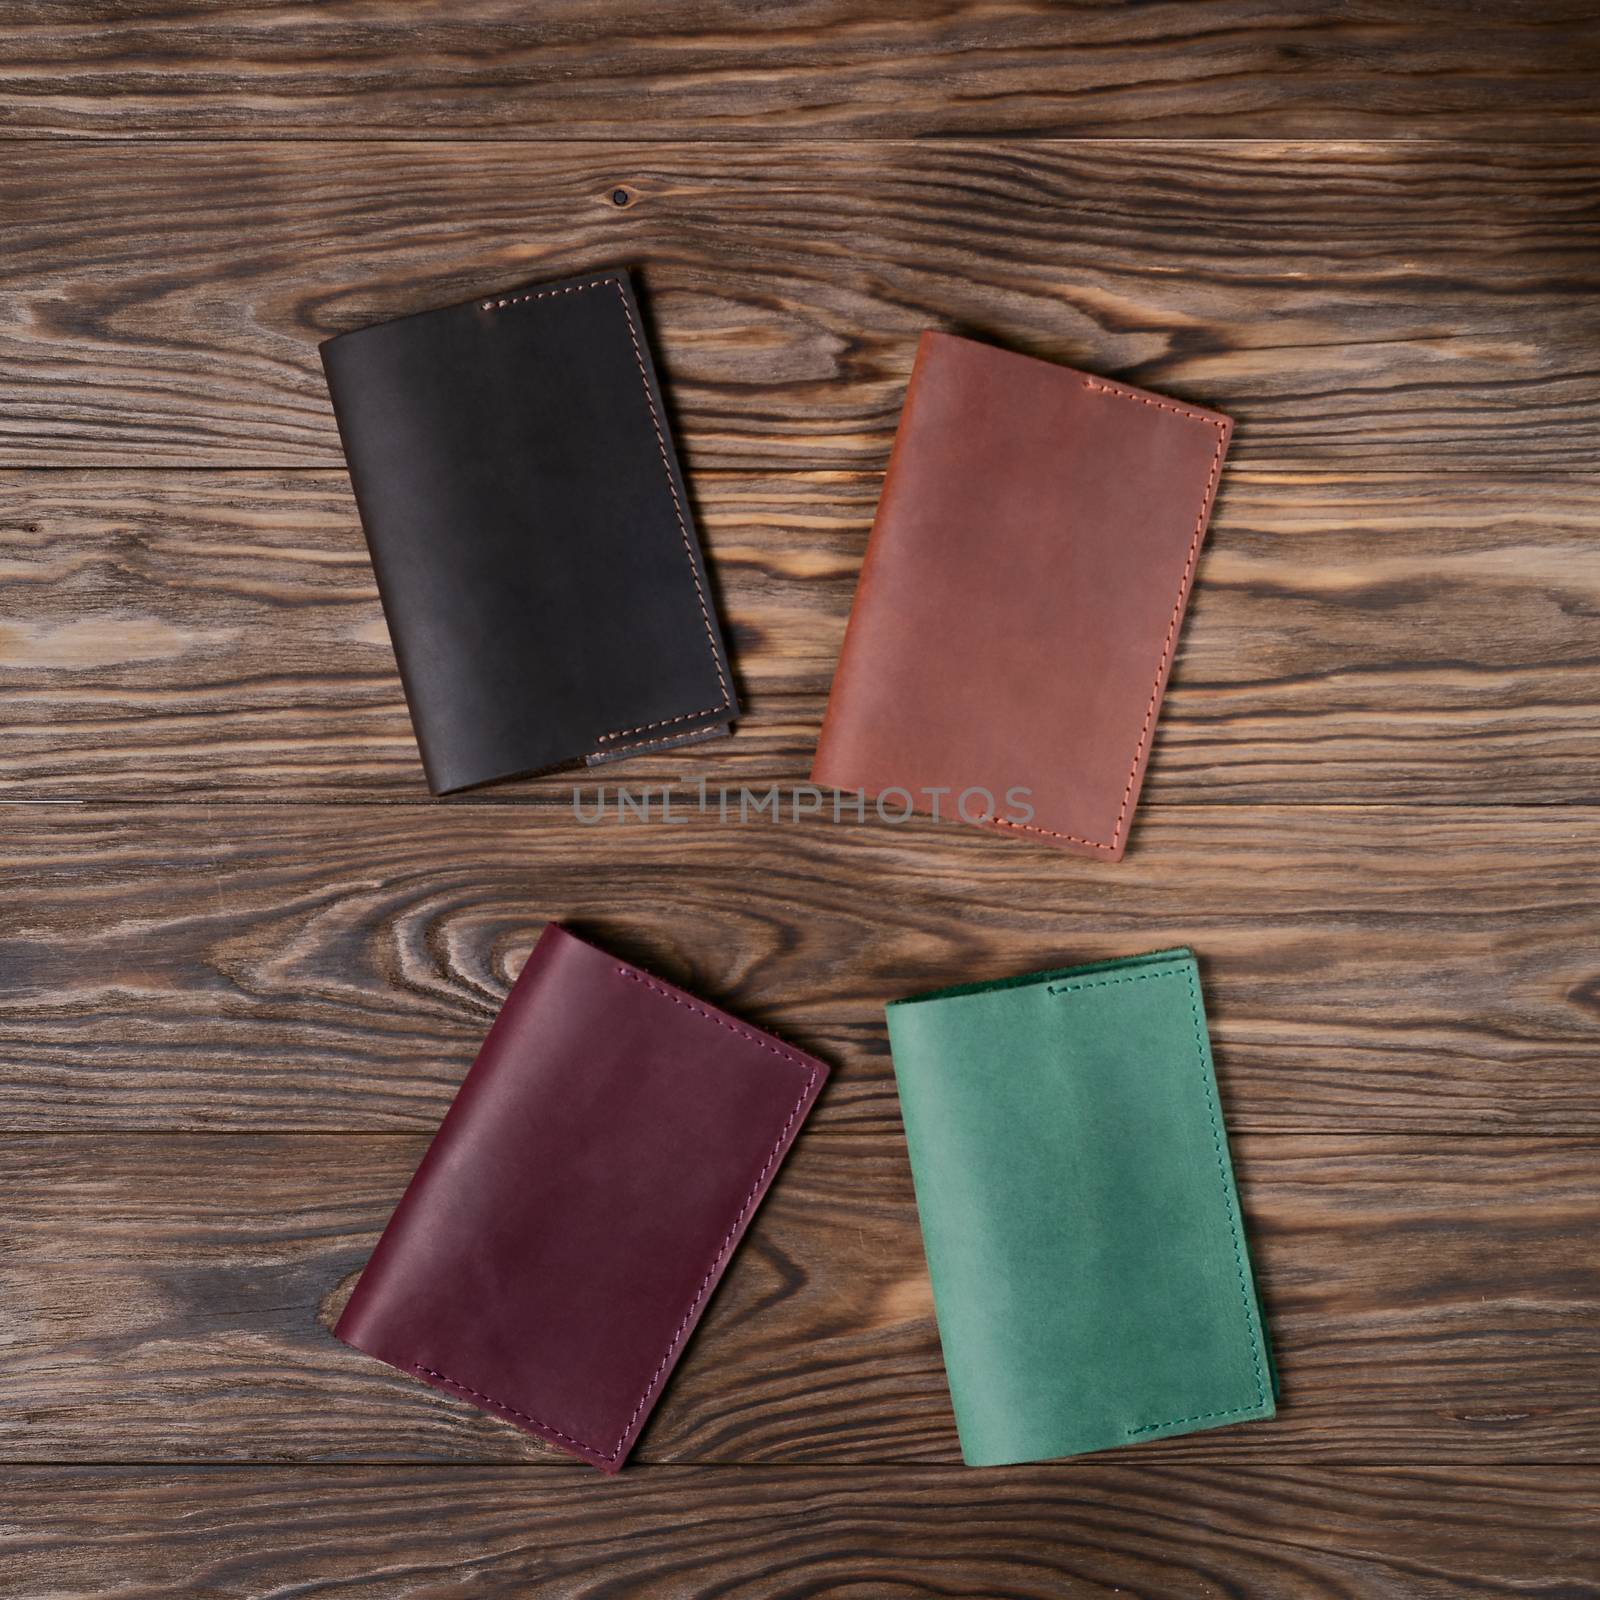 Four handmade leather passport covers on wooden textured background. Up to down view. Stock photo of luxury accessories. by alexsdriver